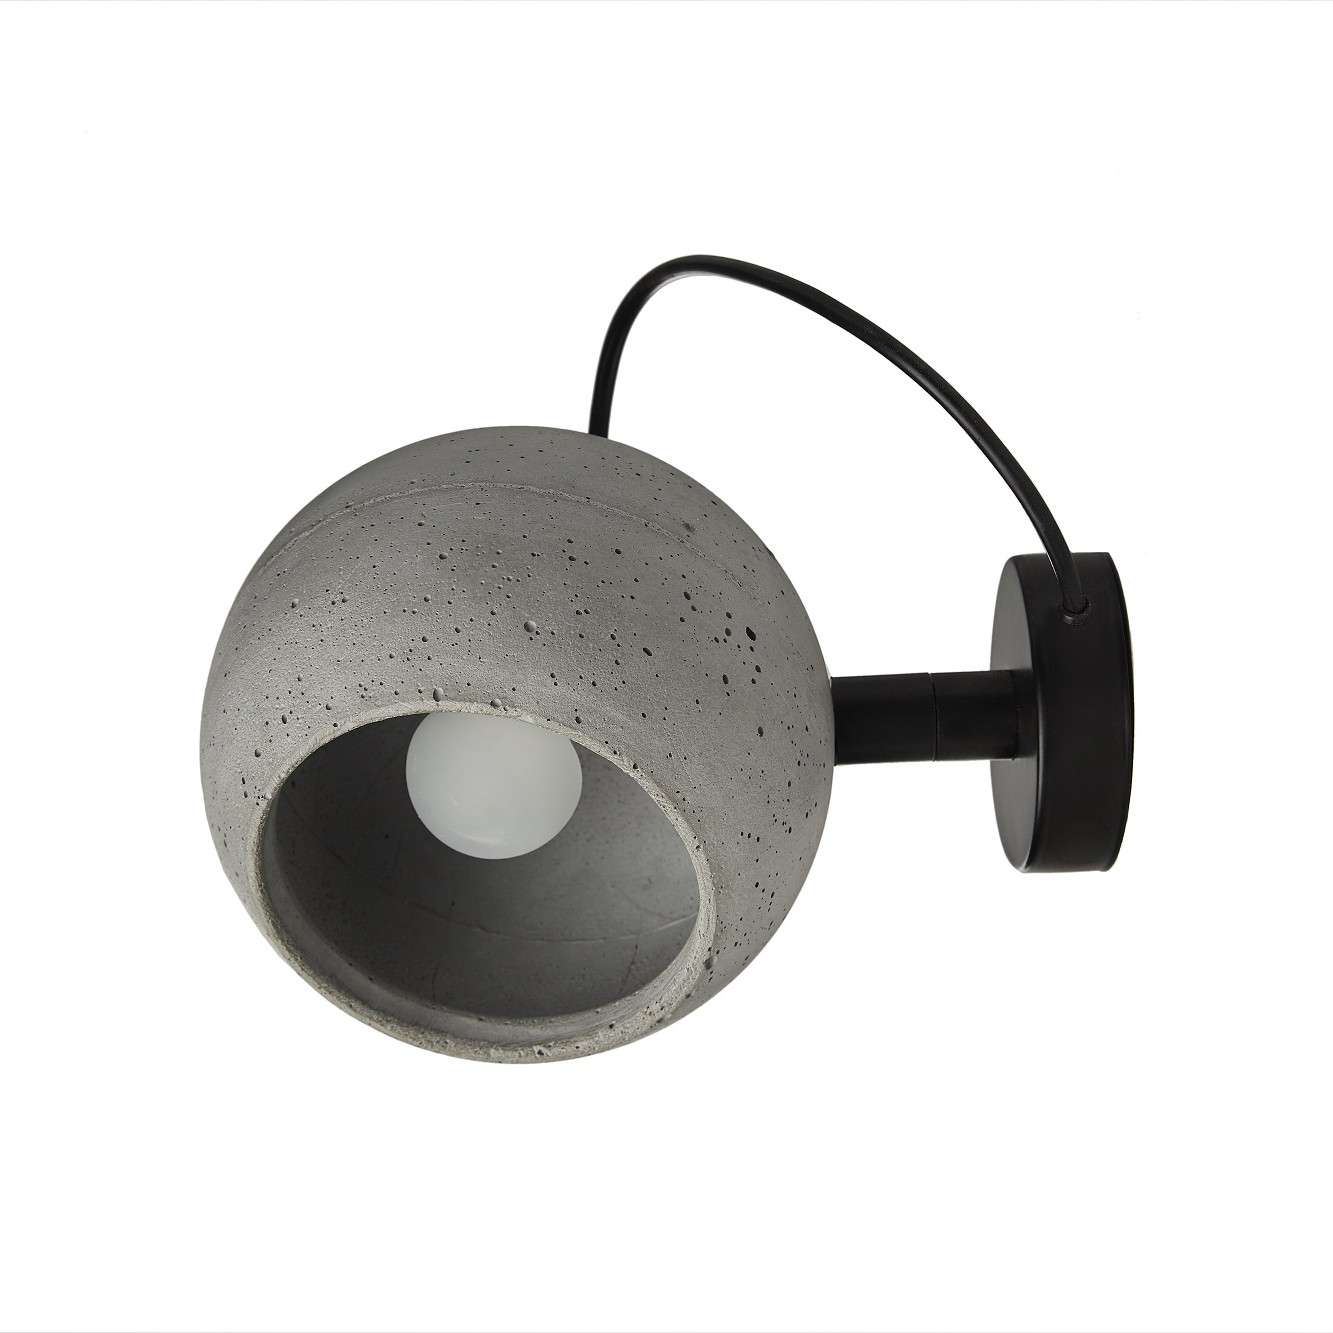 superfly W concrete wall lamp